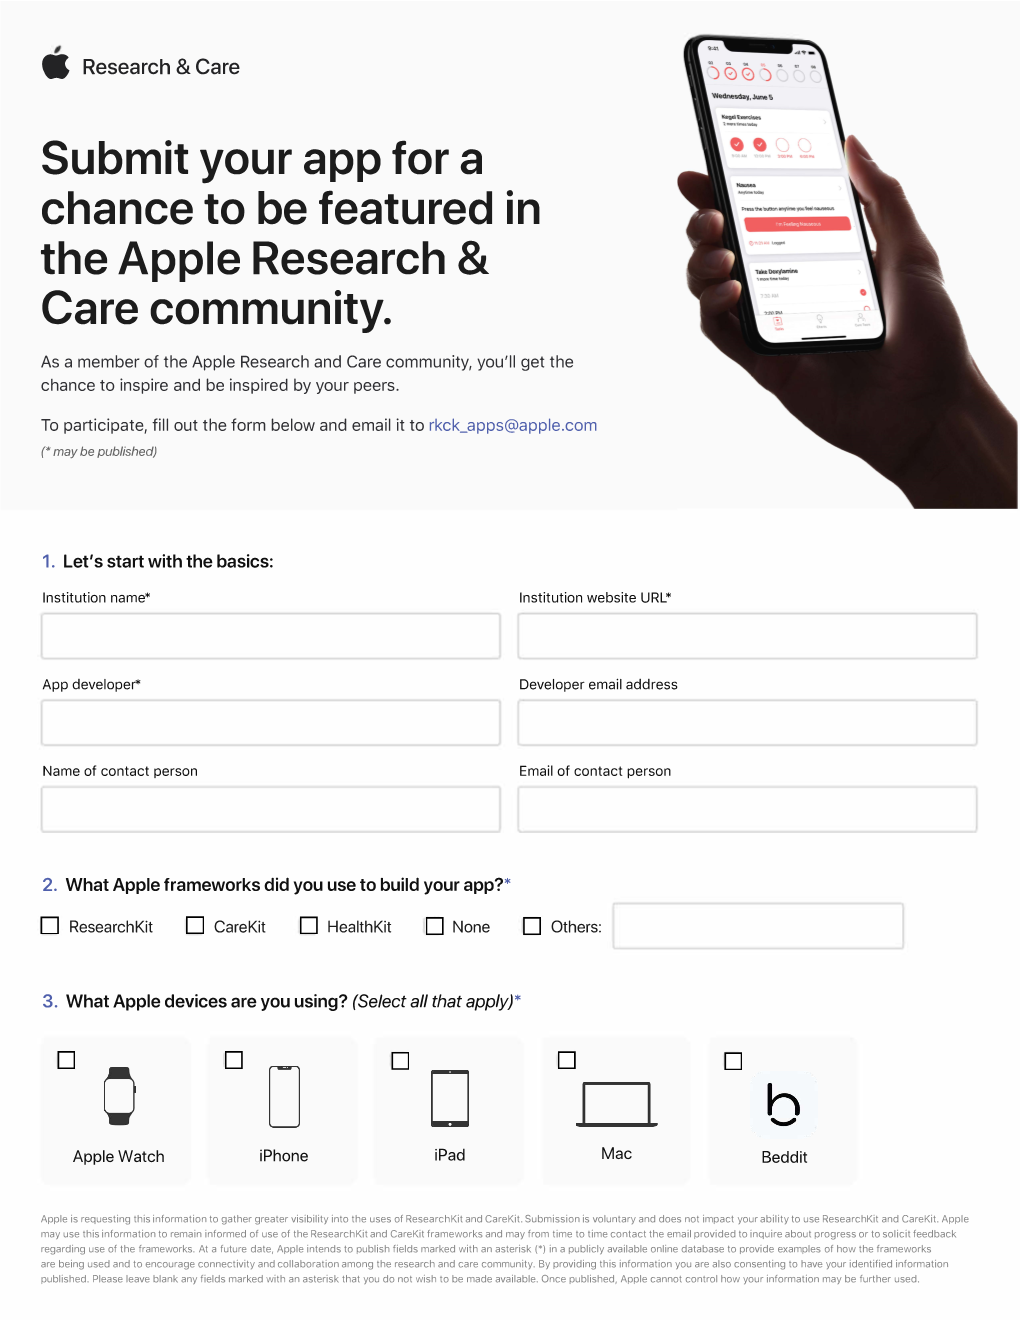 Submit Your Researchkit Or Carekit